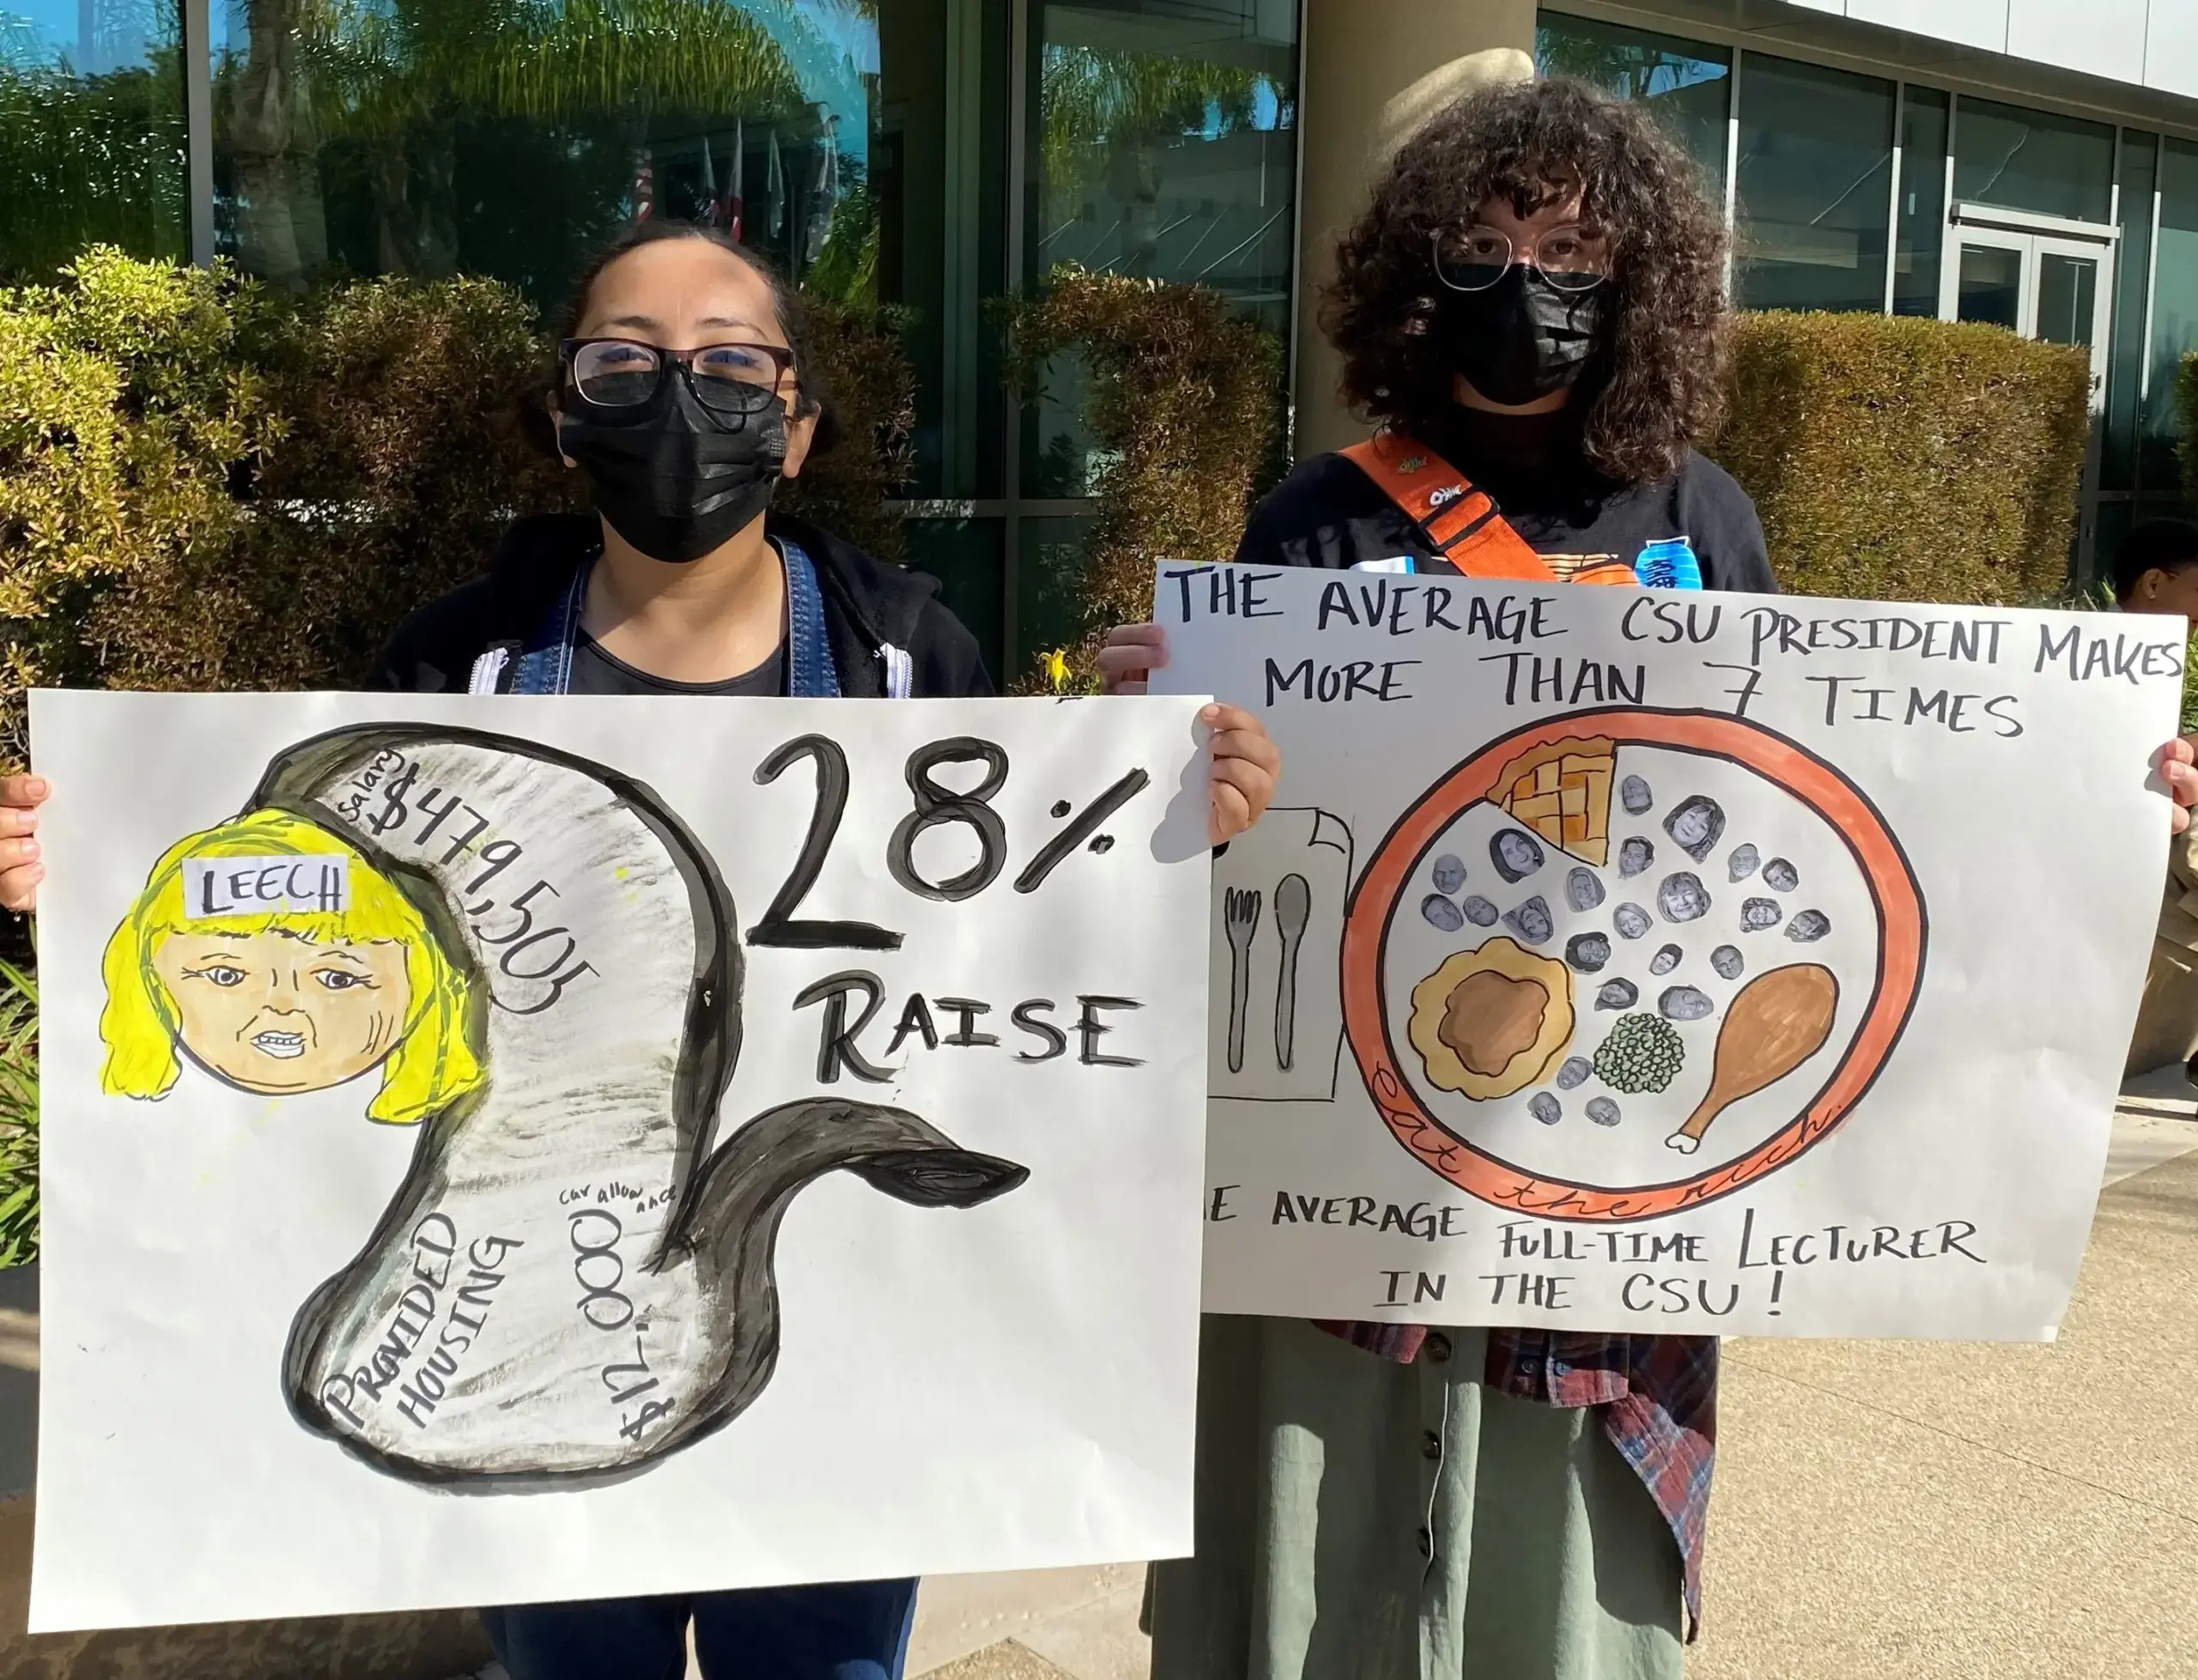 Two students with masks stand with signs outdoors.